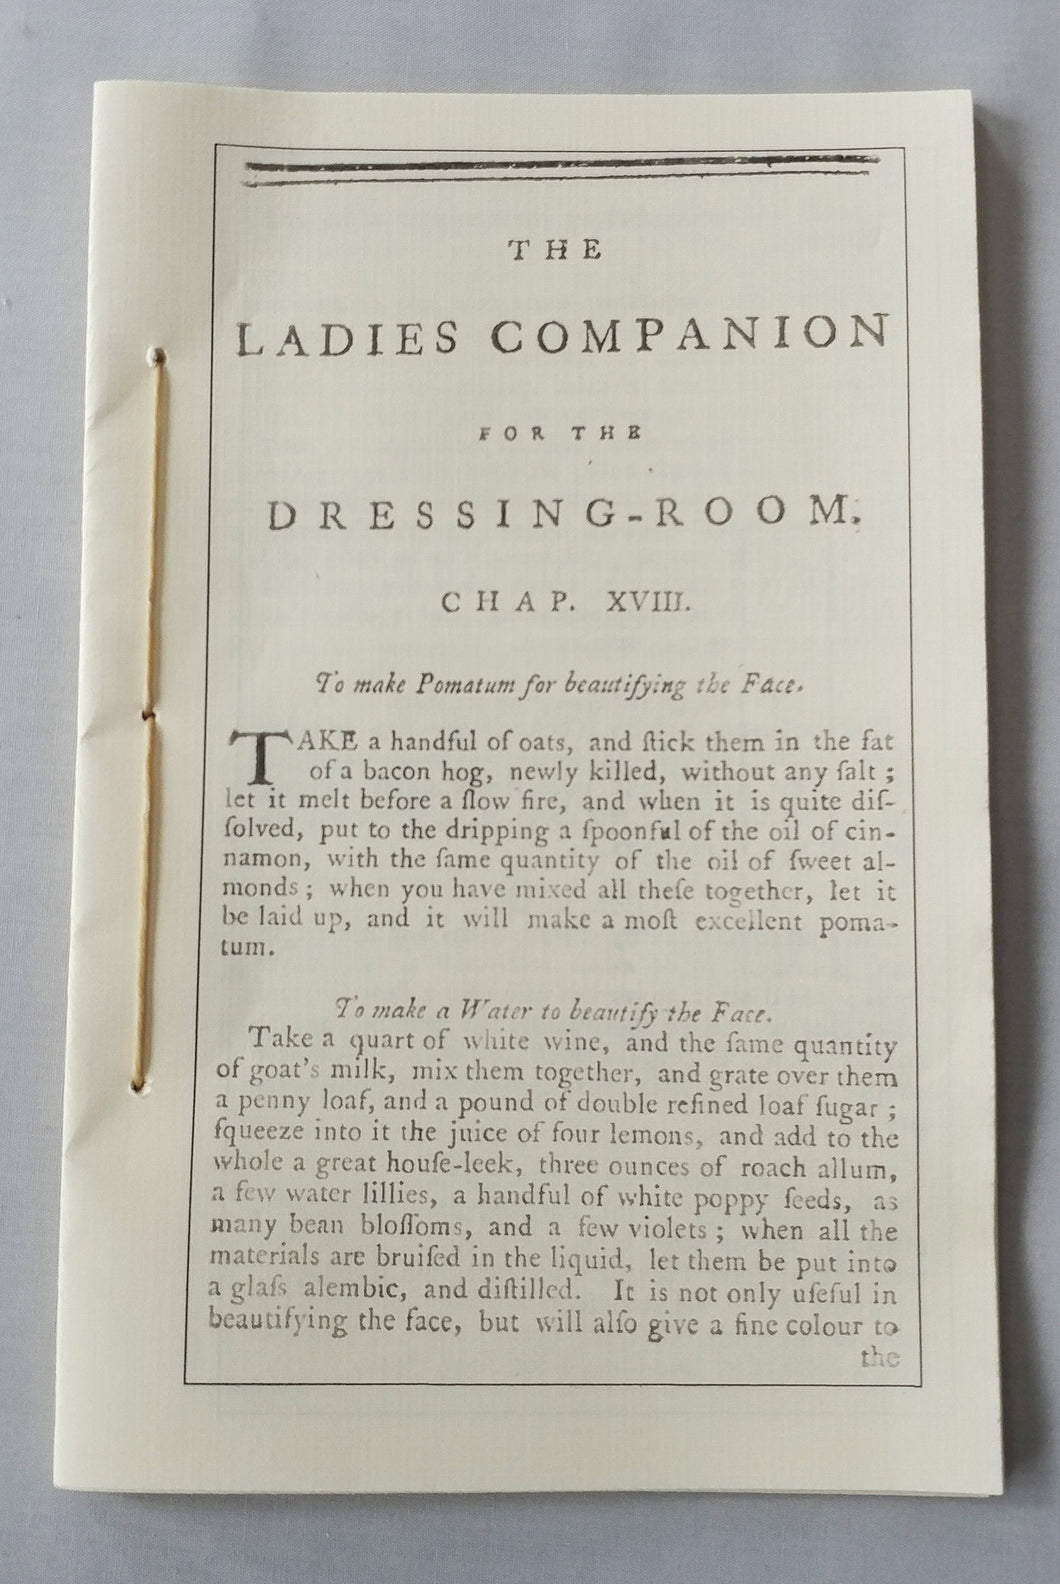 The Ladies Companion for the Dressing-Room (Chapter XVIII)